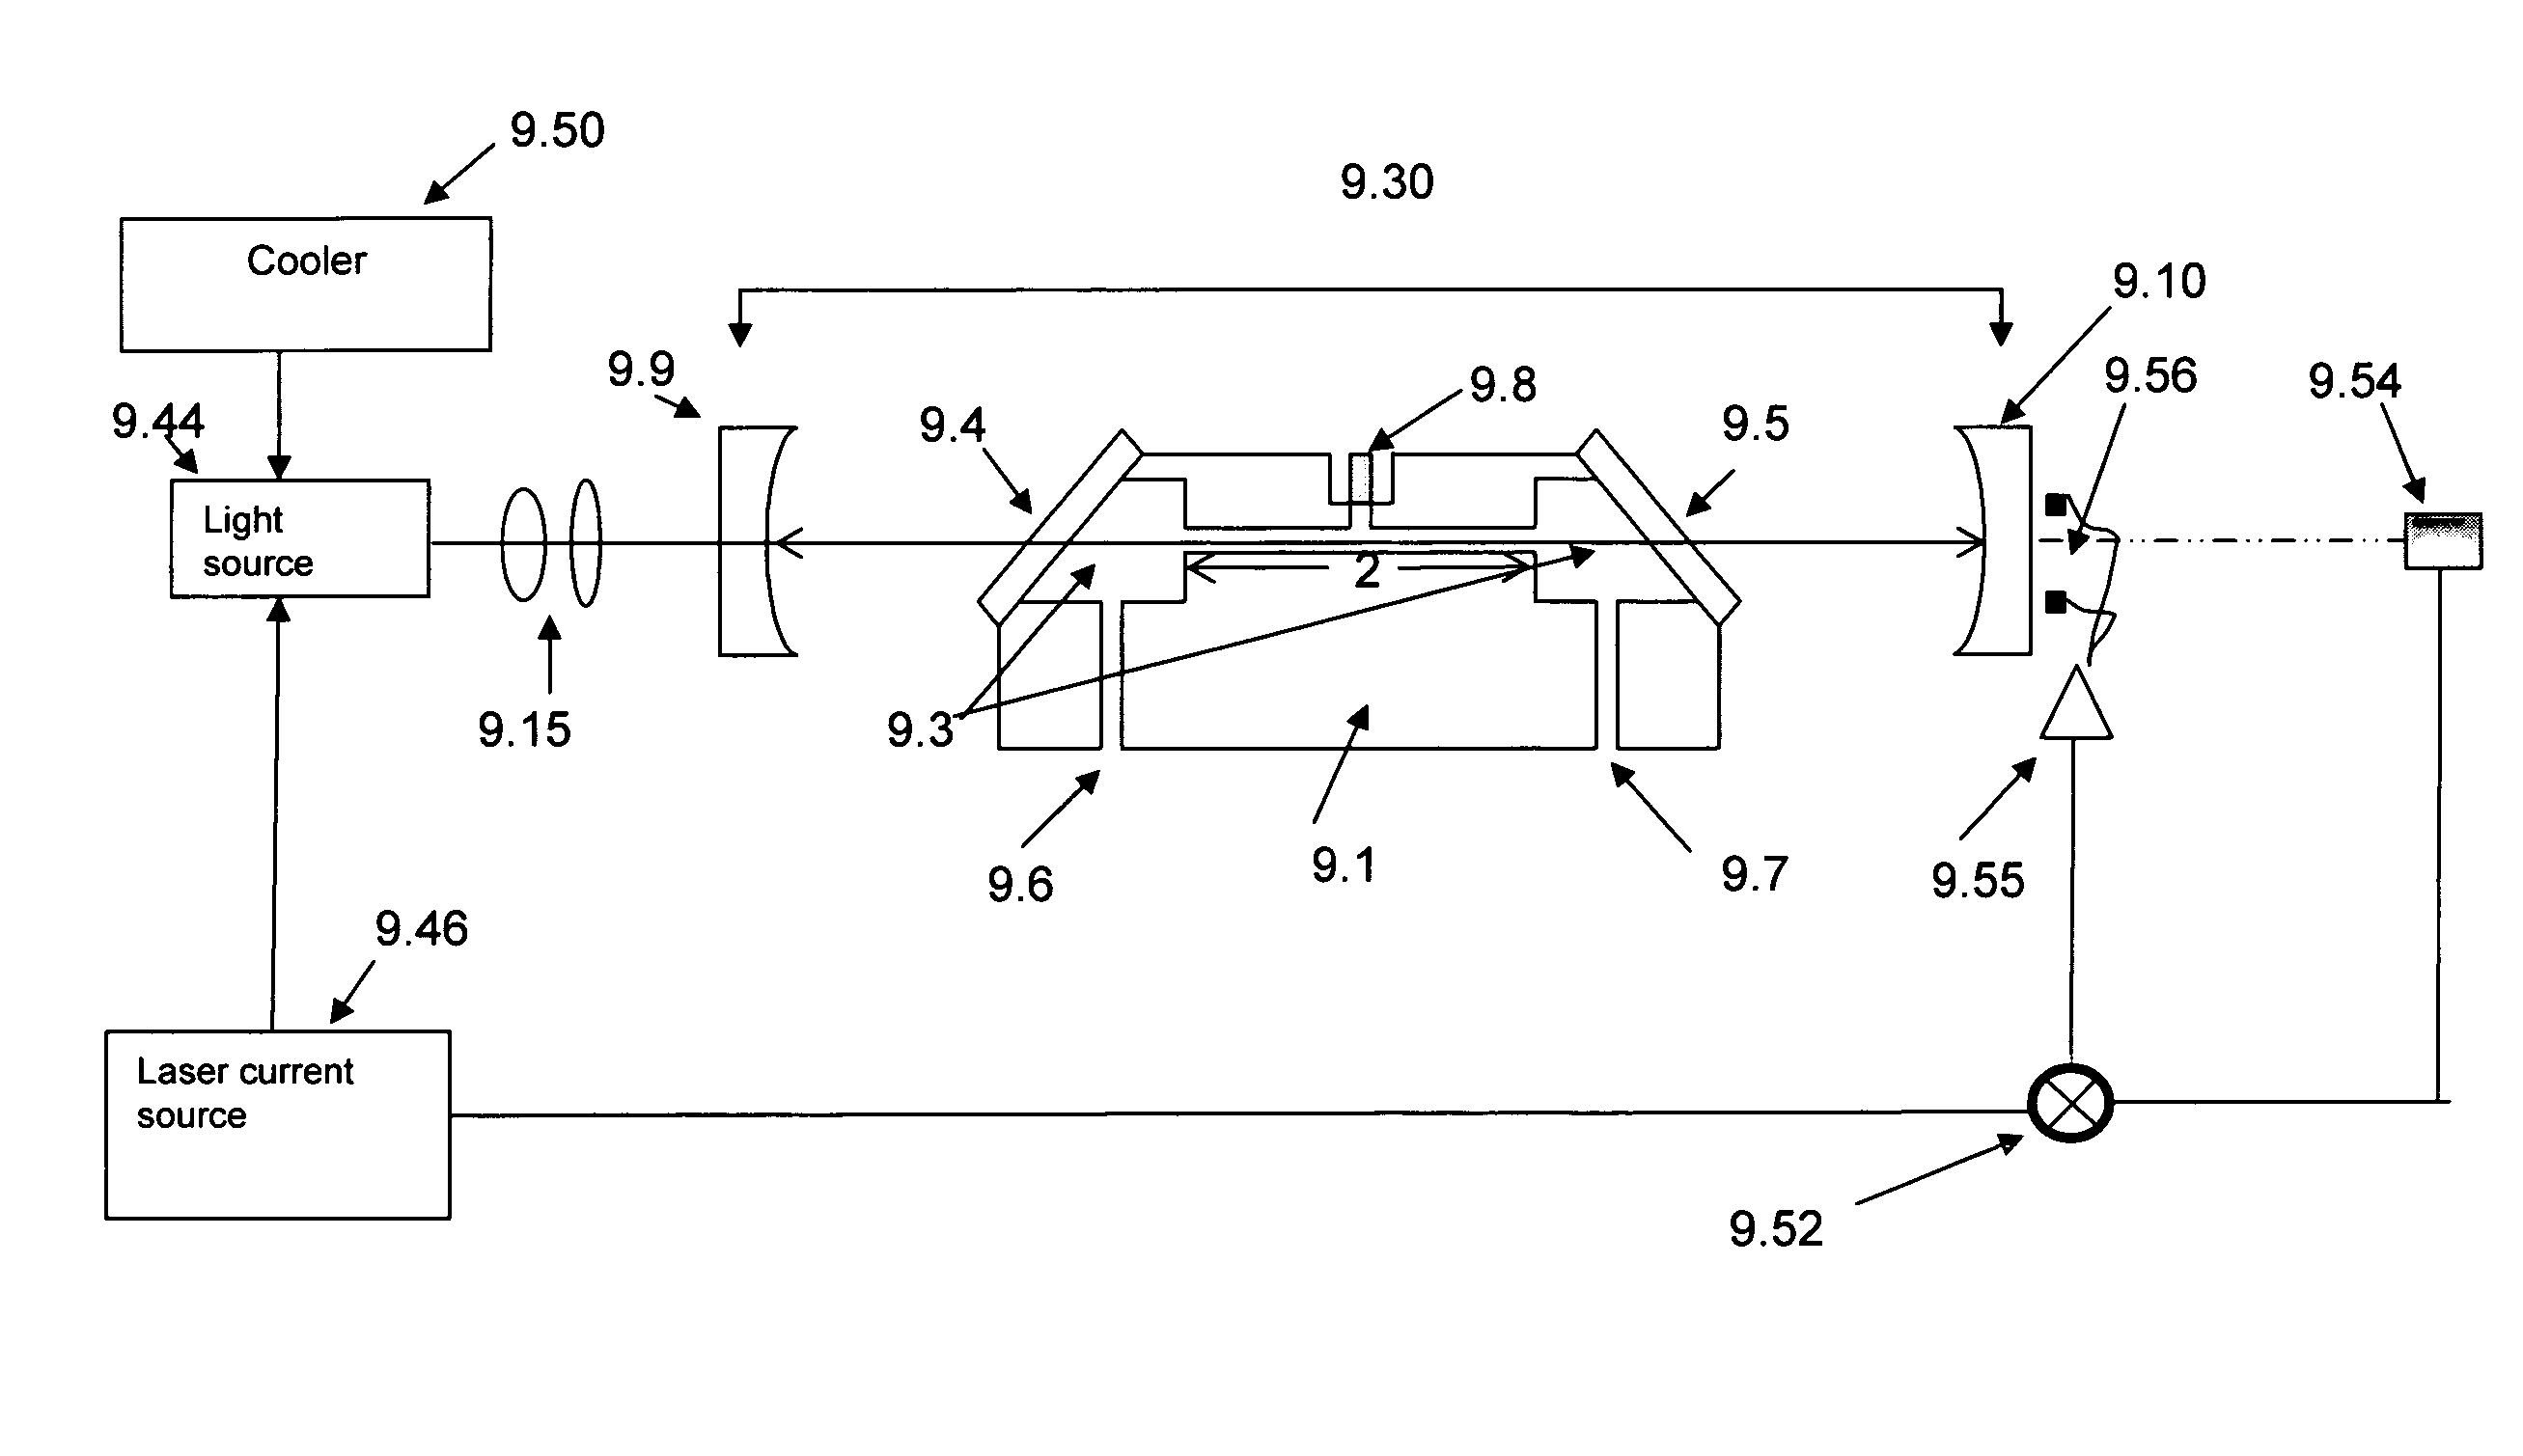 System and method for gas analysis using doubly resonant photoacoustic spectroscopy